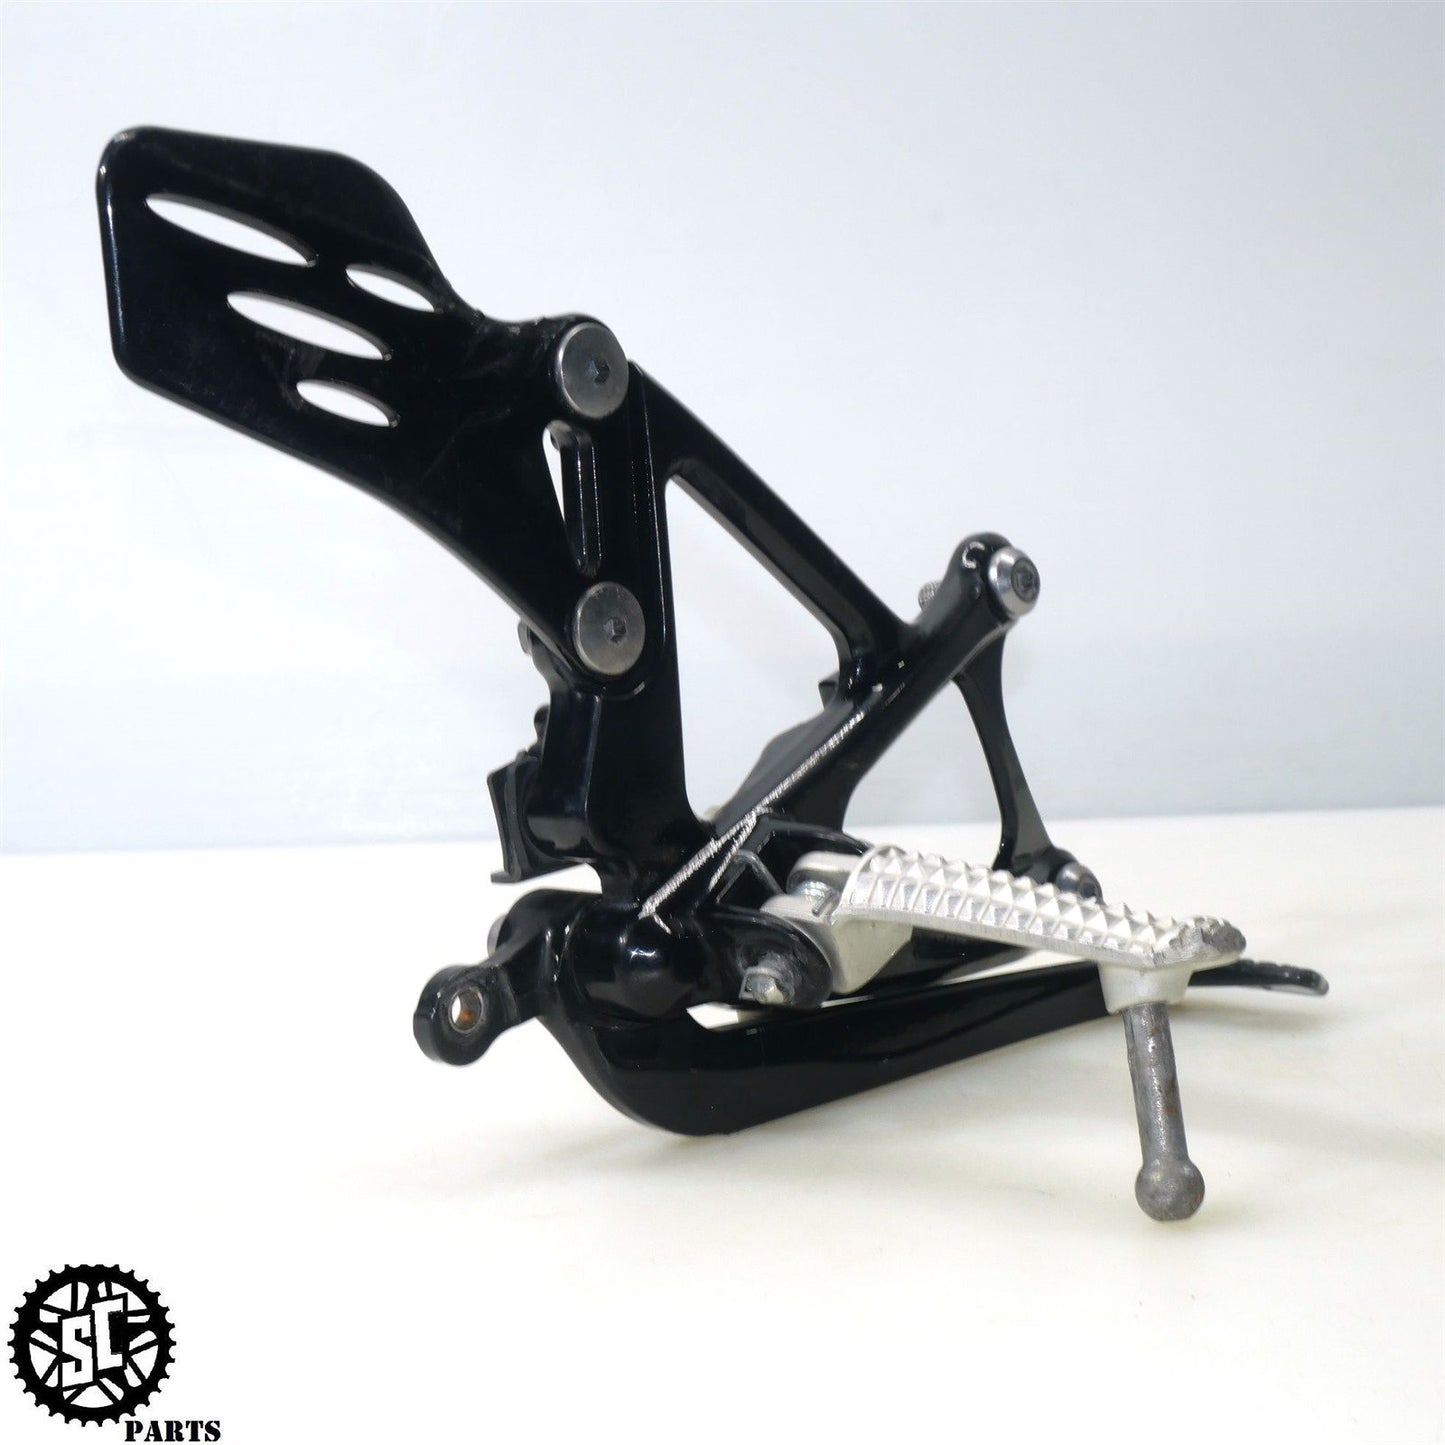 09-14 YAMAHA YZF R1 RIGHT REARSET FOOT REST Y39